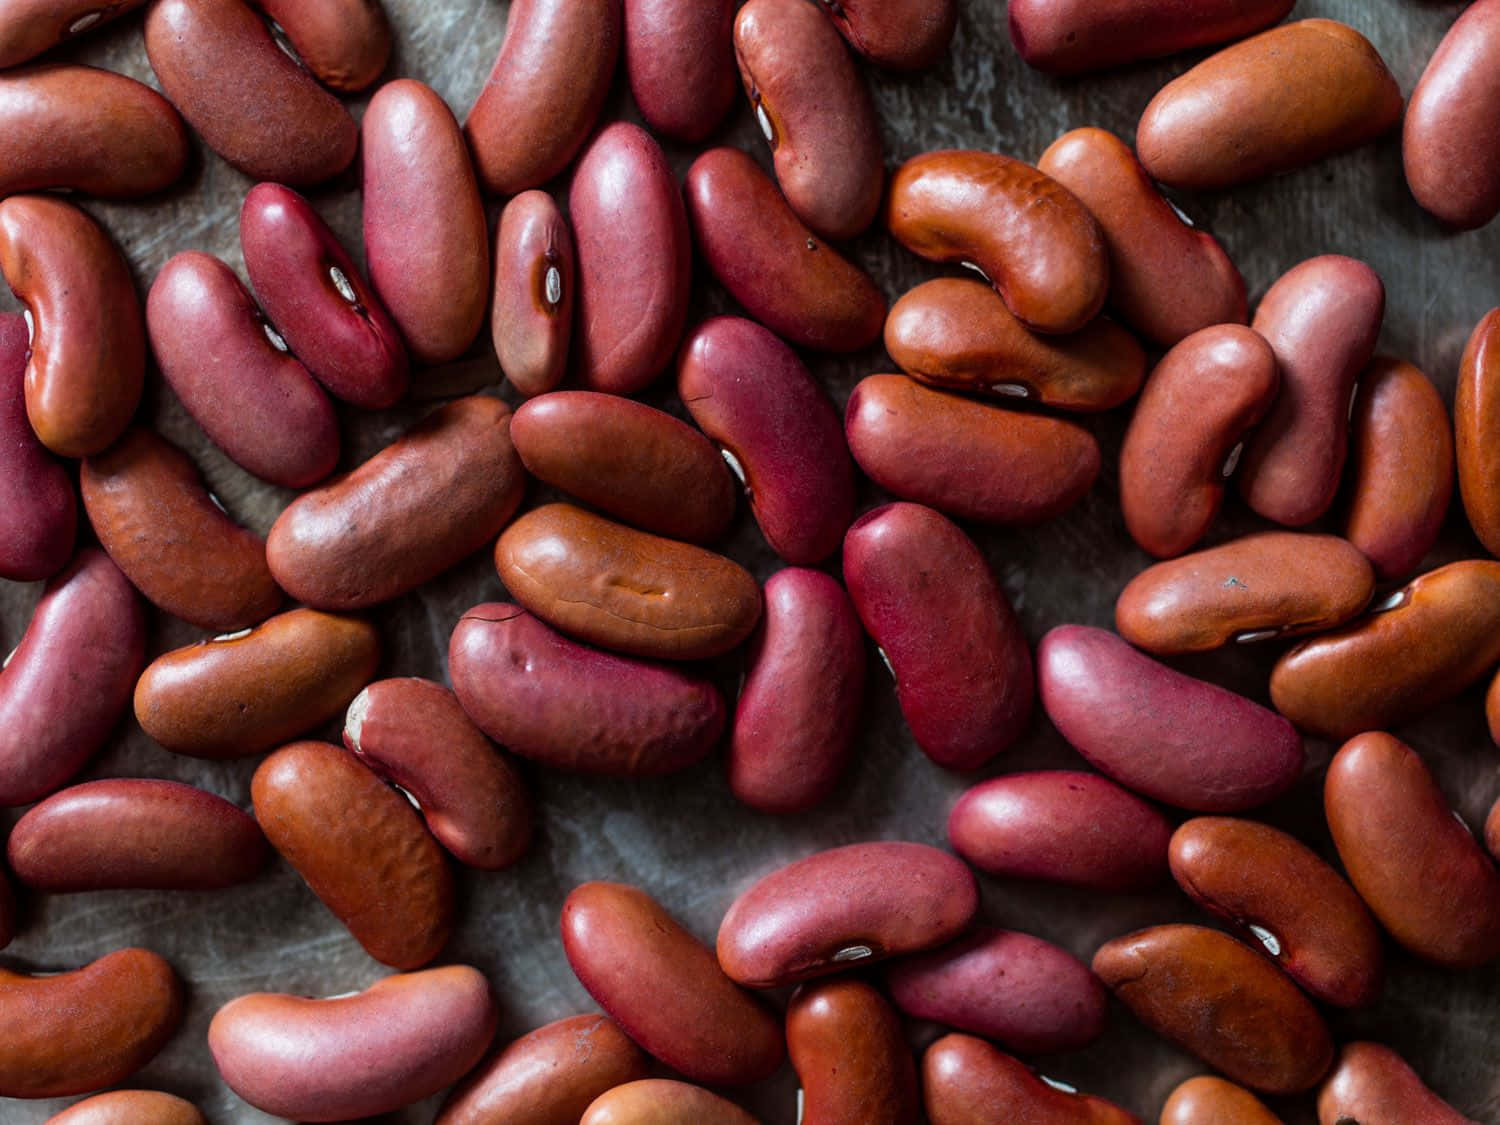 "Up-close shot of healthy, luscious beans"